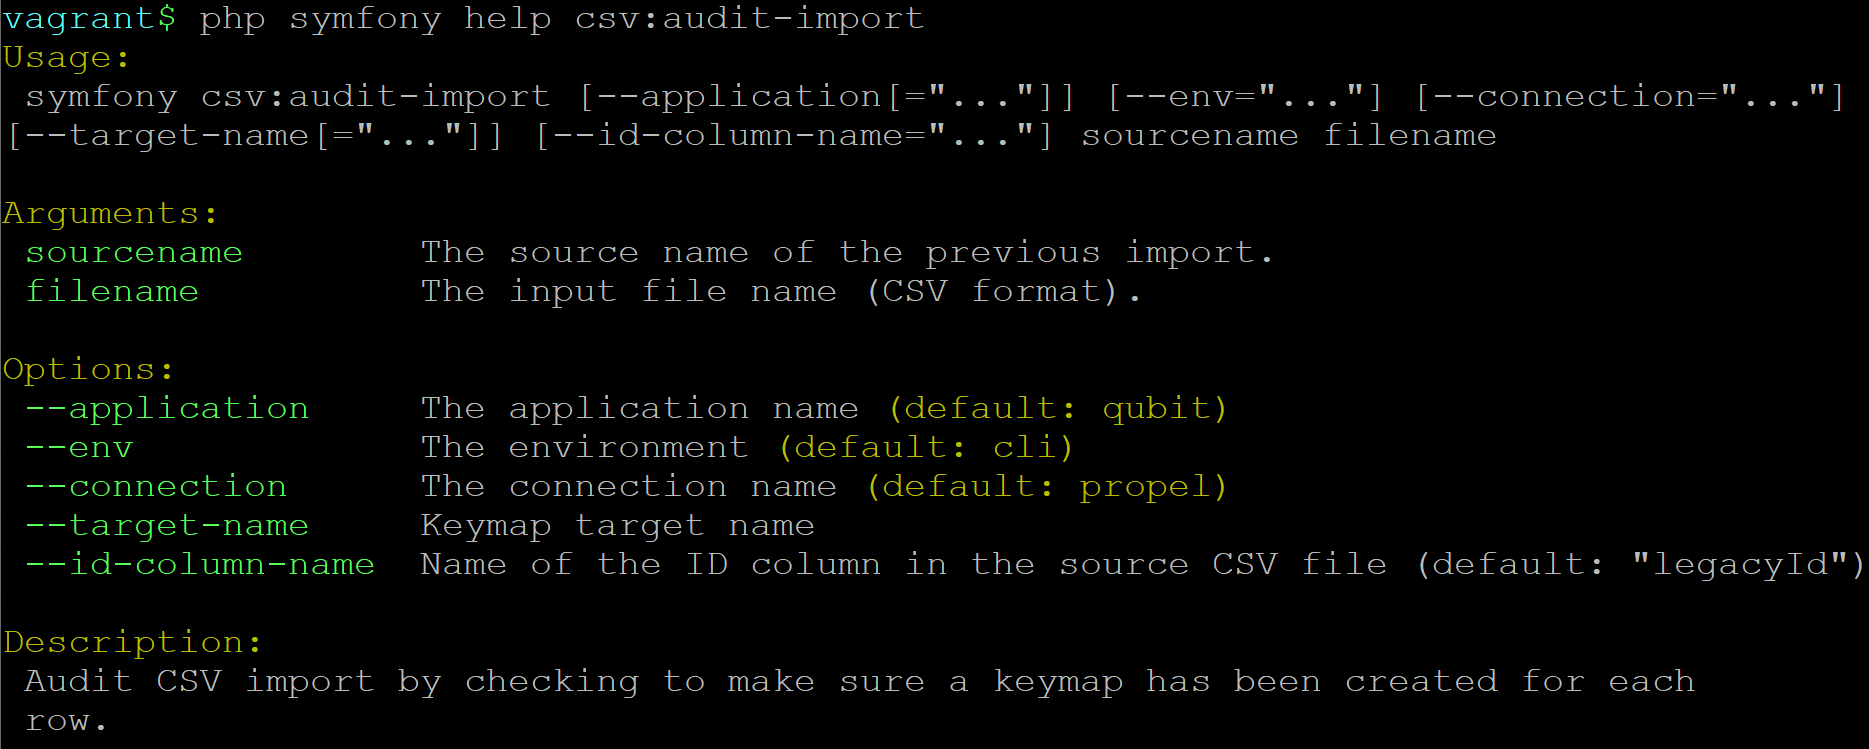 An image of the help output shown in the console for the csv:audit-import command-line task